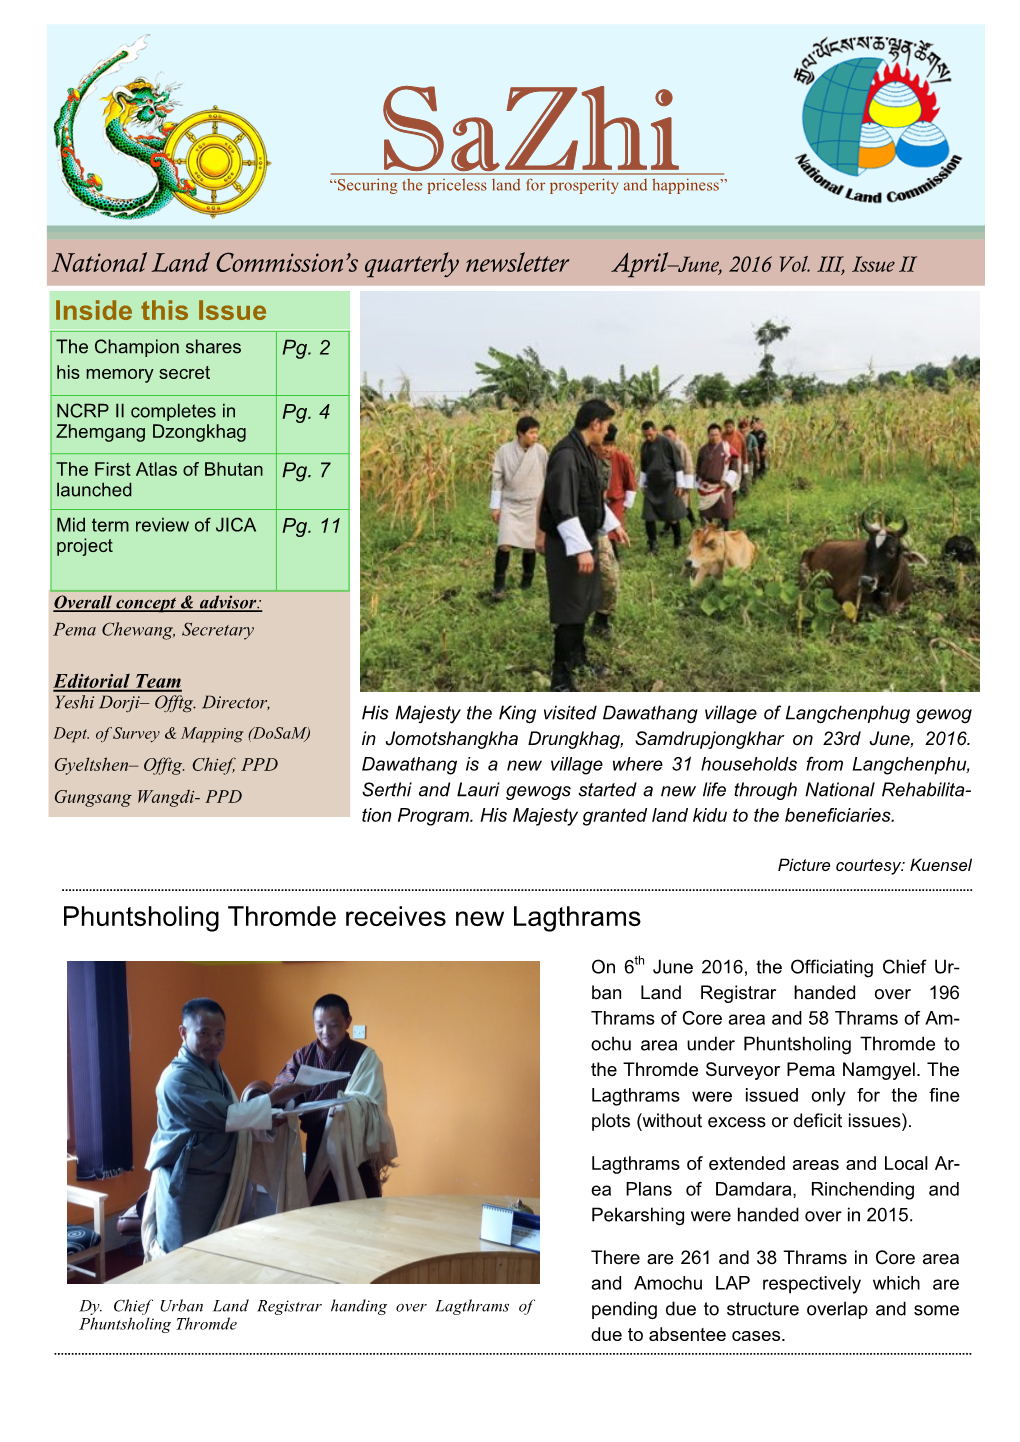 National Land Commission's Quarterly Newsletter April Inside This Issue